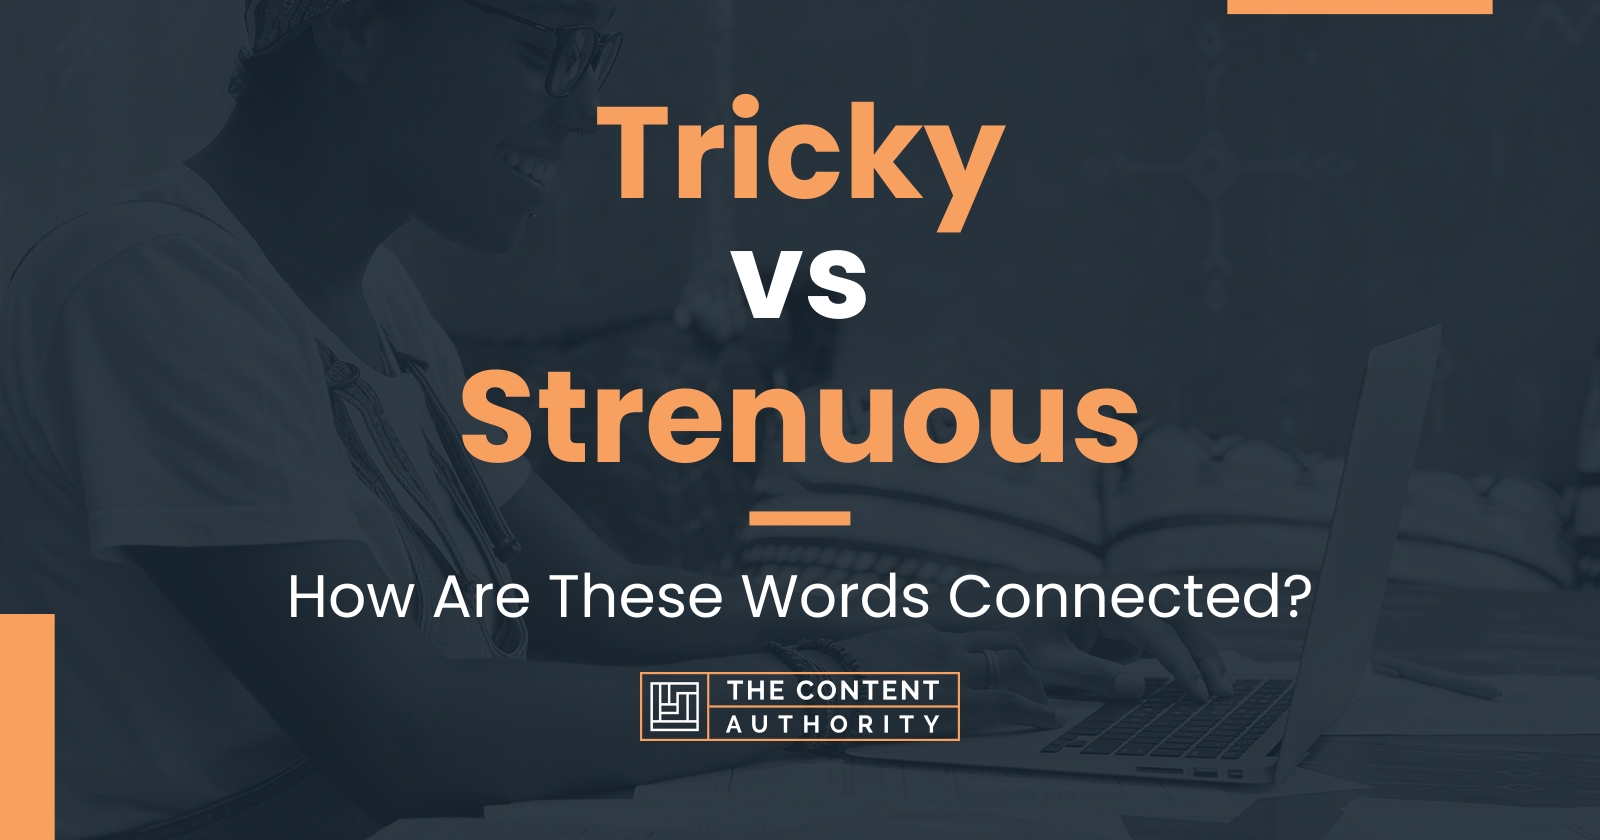 Tricky vs Strenuous: How Are These Words Connected?